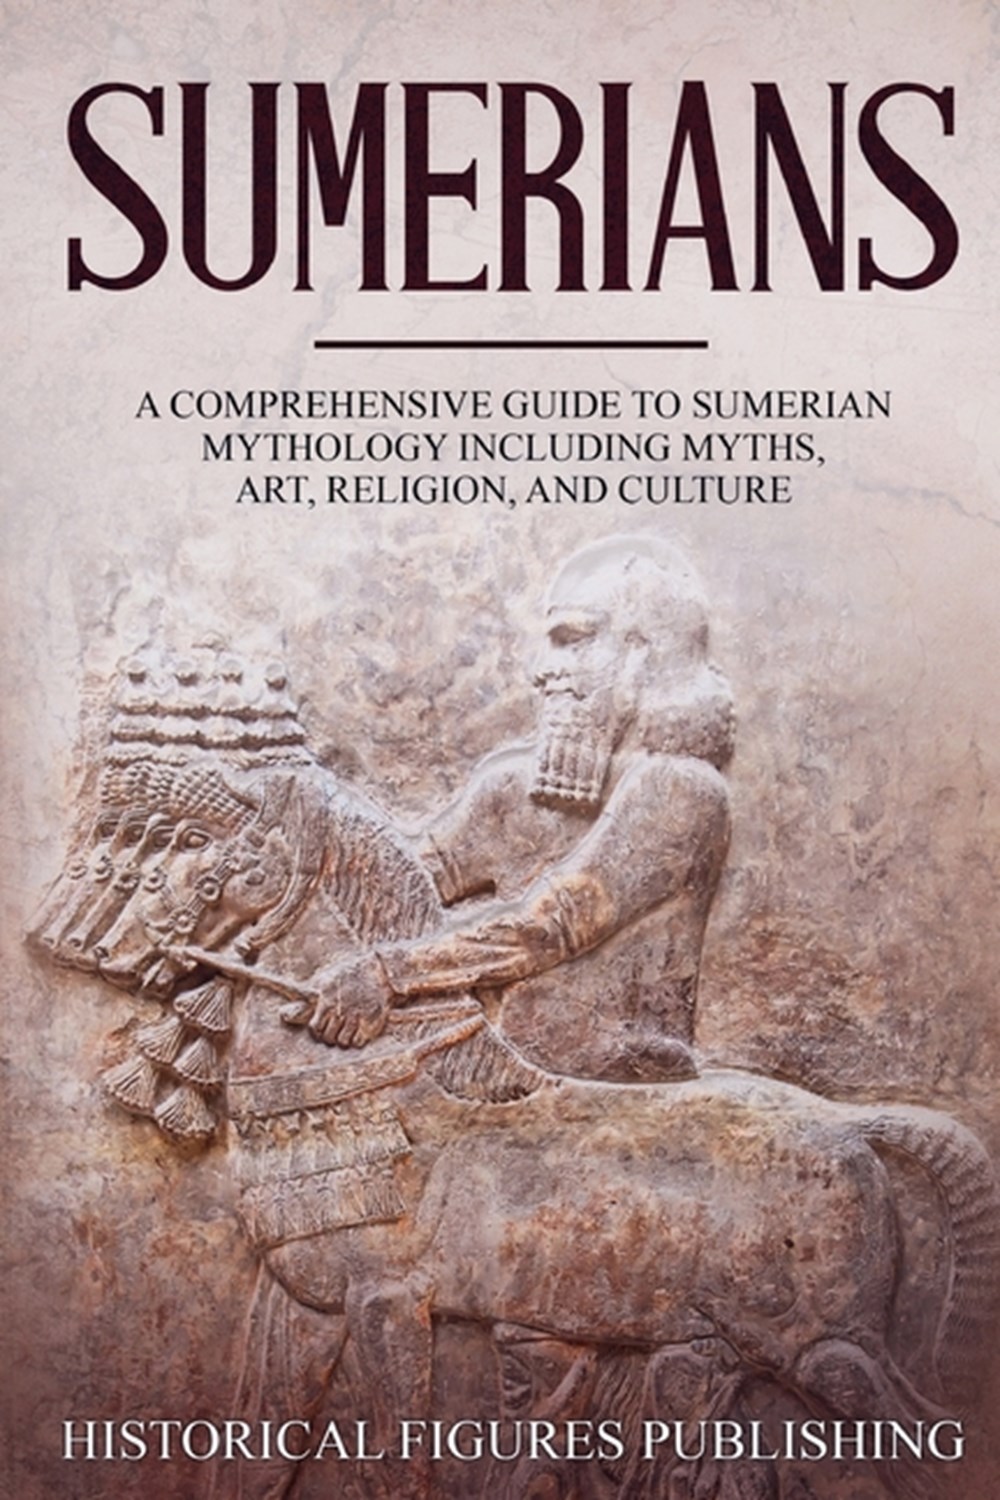 Sumerians: A Comprehensive Guide to Sumerian Mythology Including Myths, Art, Religion, and Culture